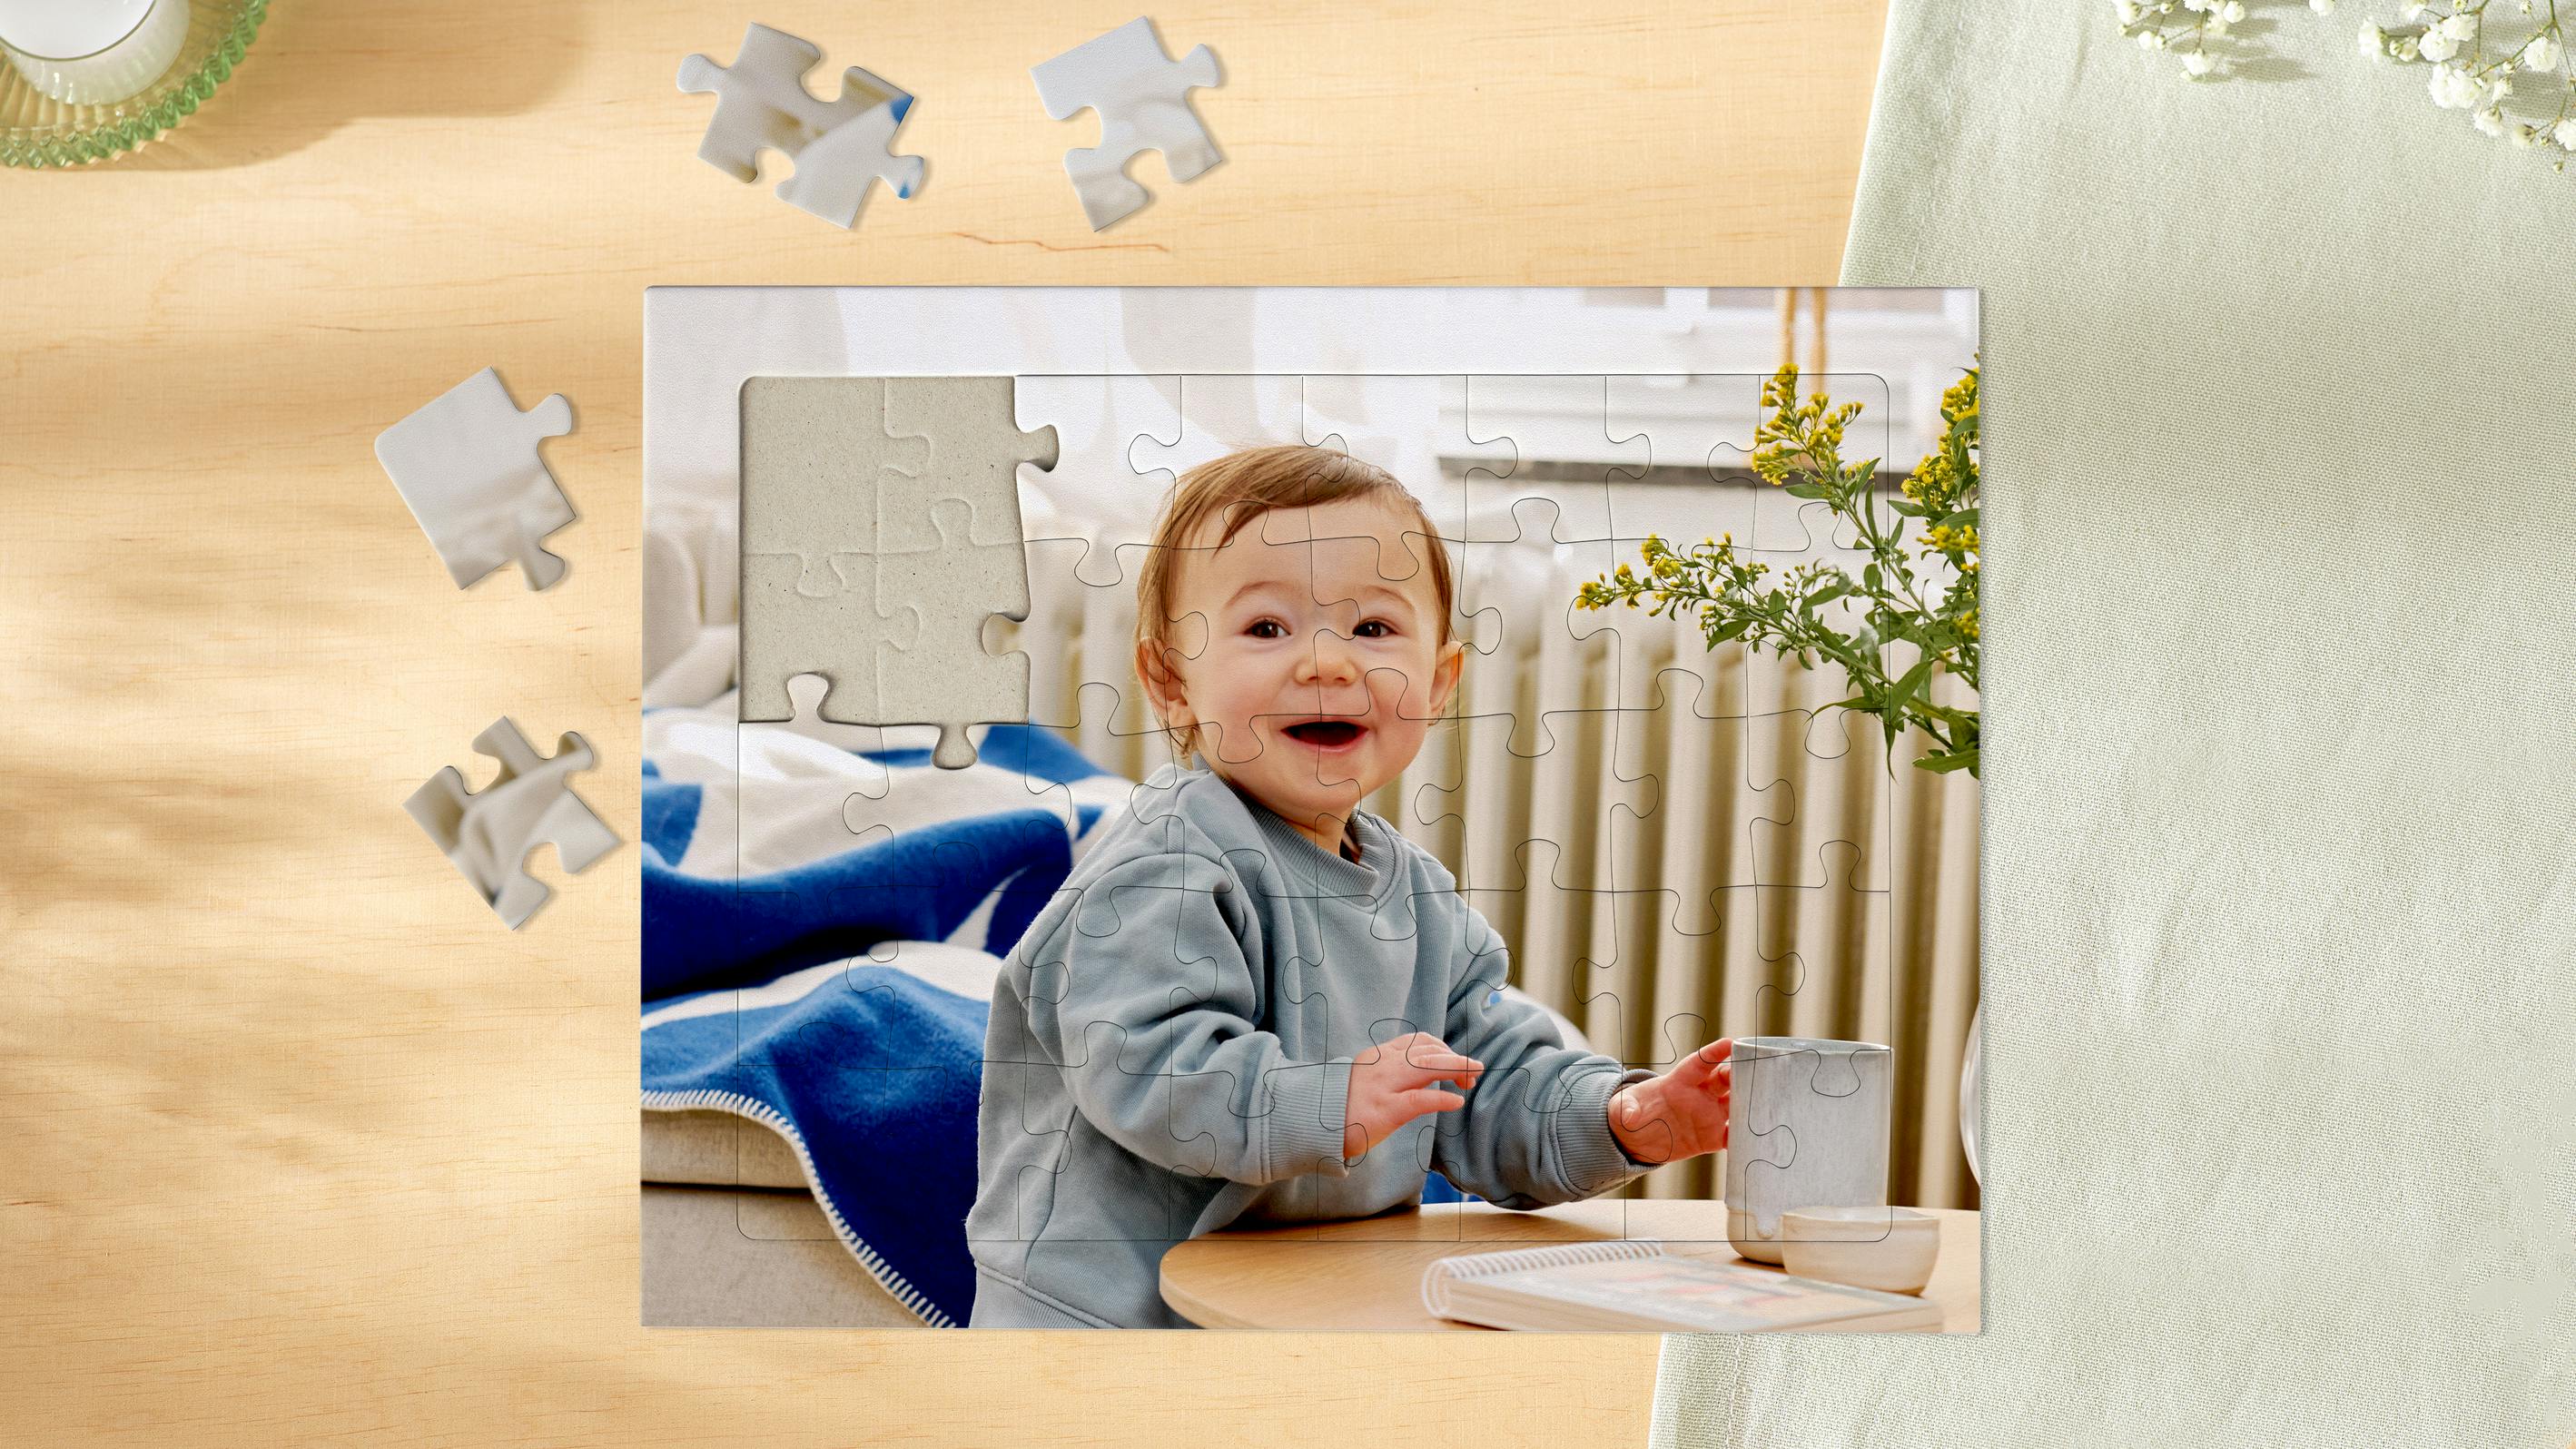 Children's puzzle with photo of a baby